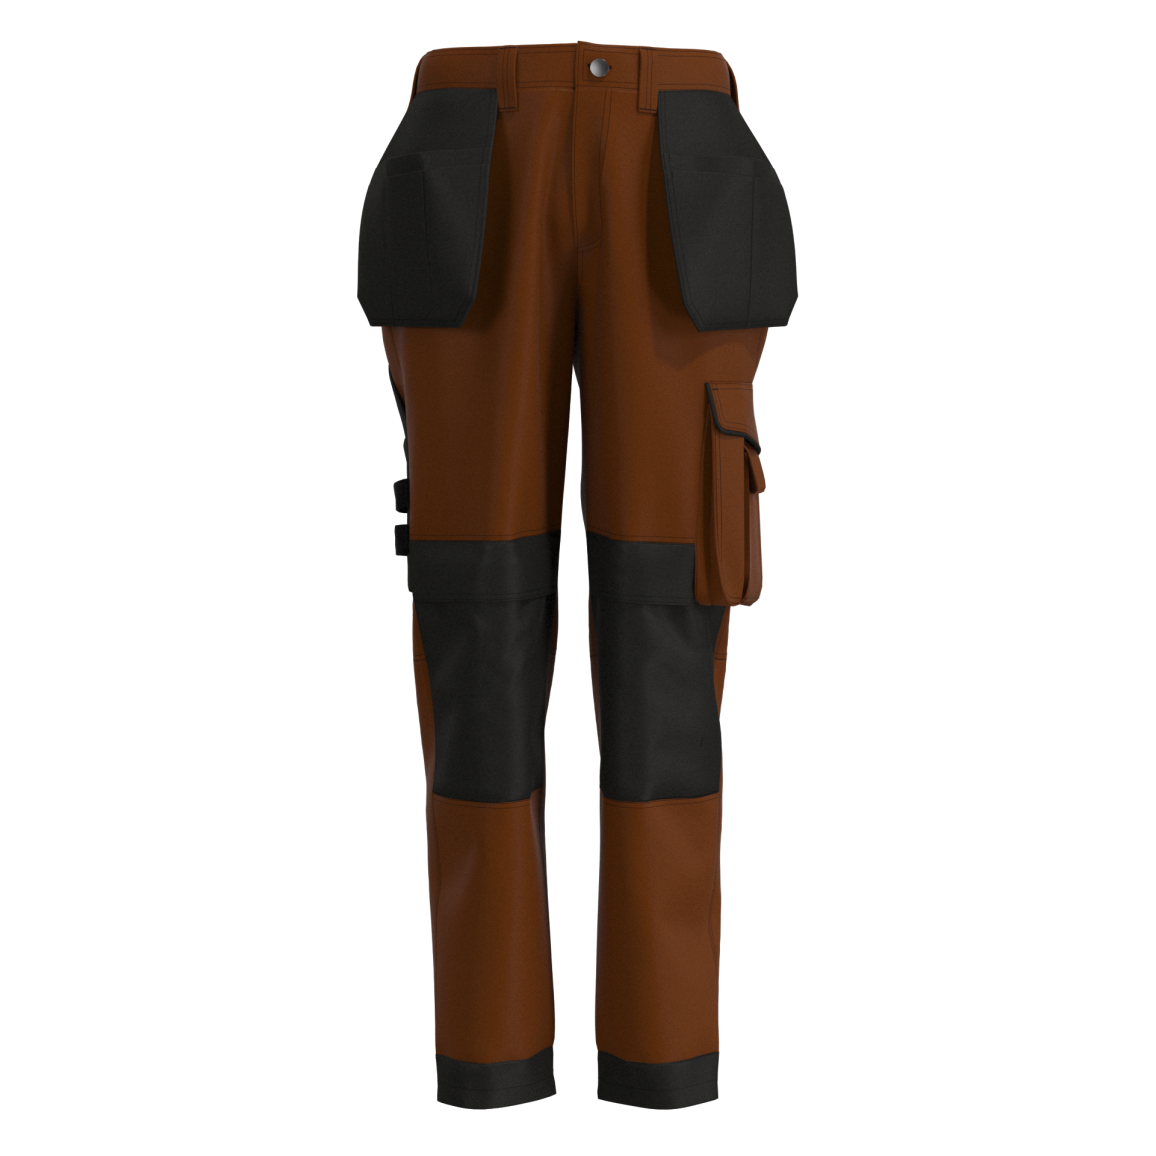 work trousers with multi pockets for work men and women Featured Image